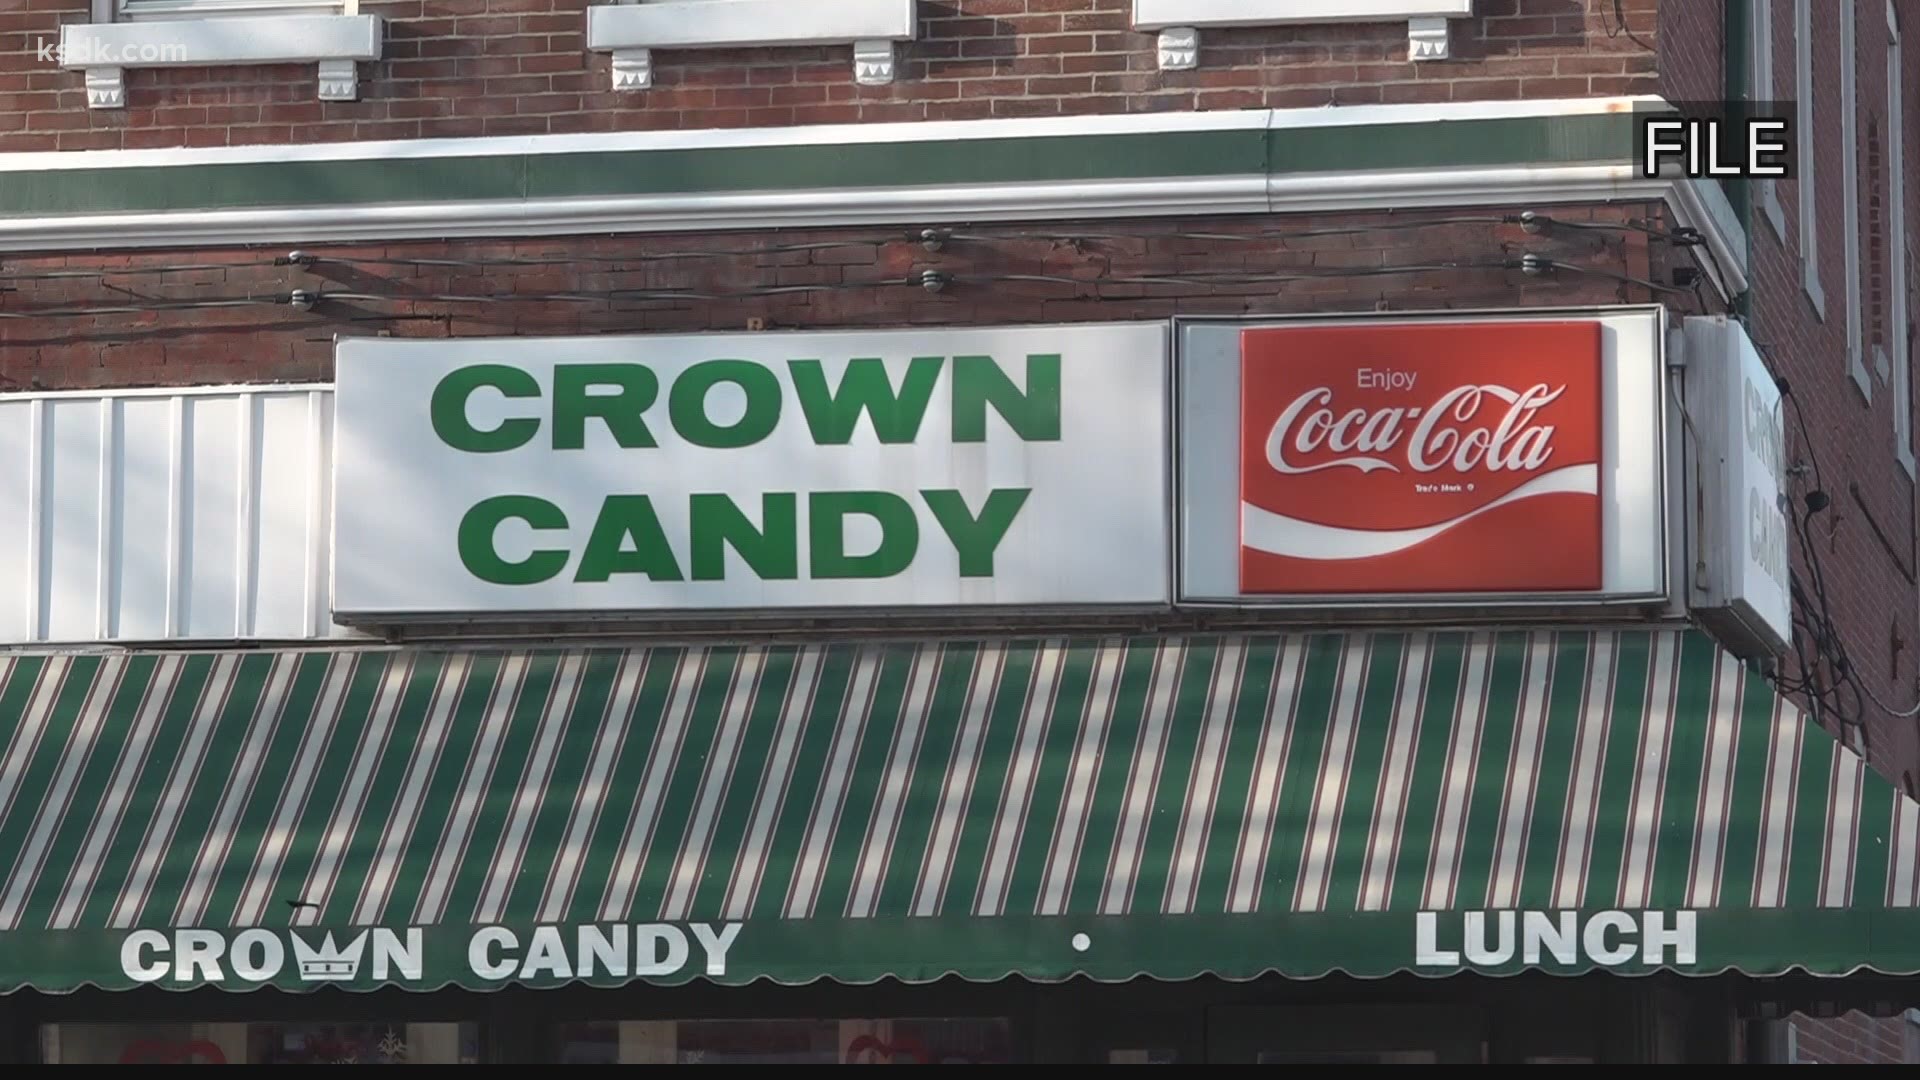 Established in 1913, Crown Candy has seen its share of hardships.